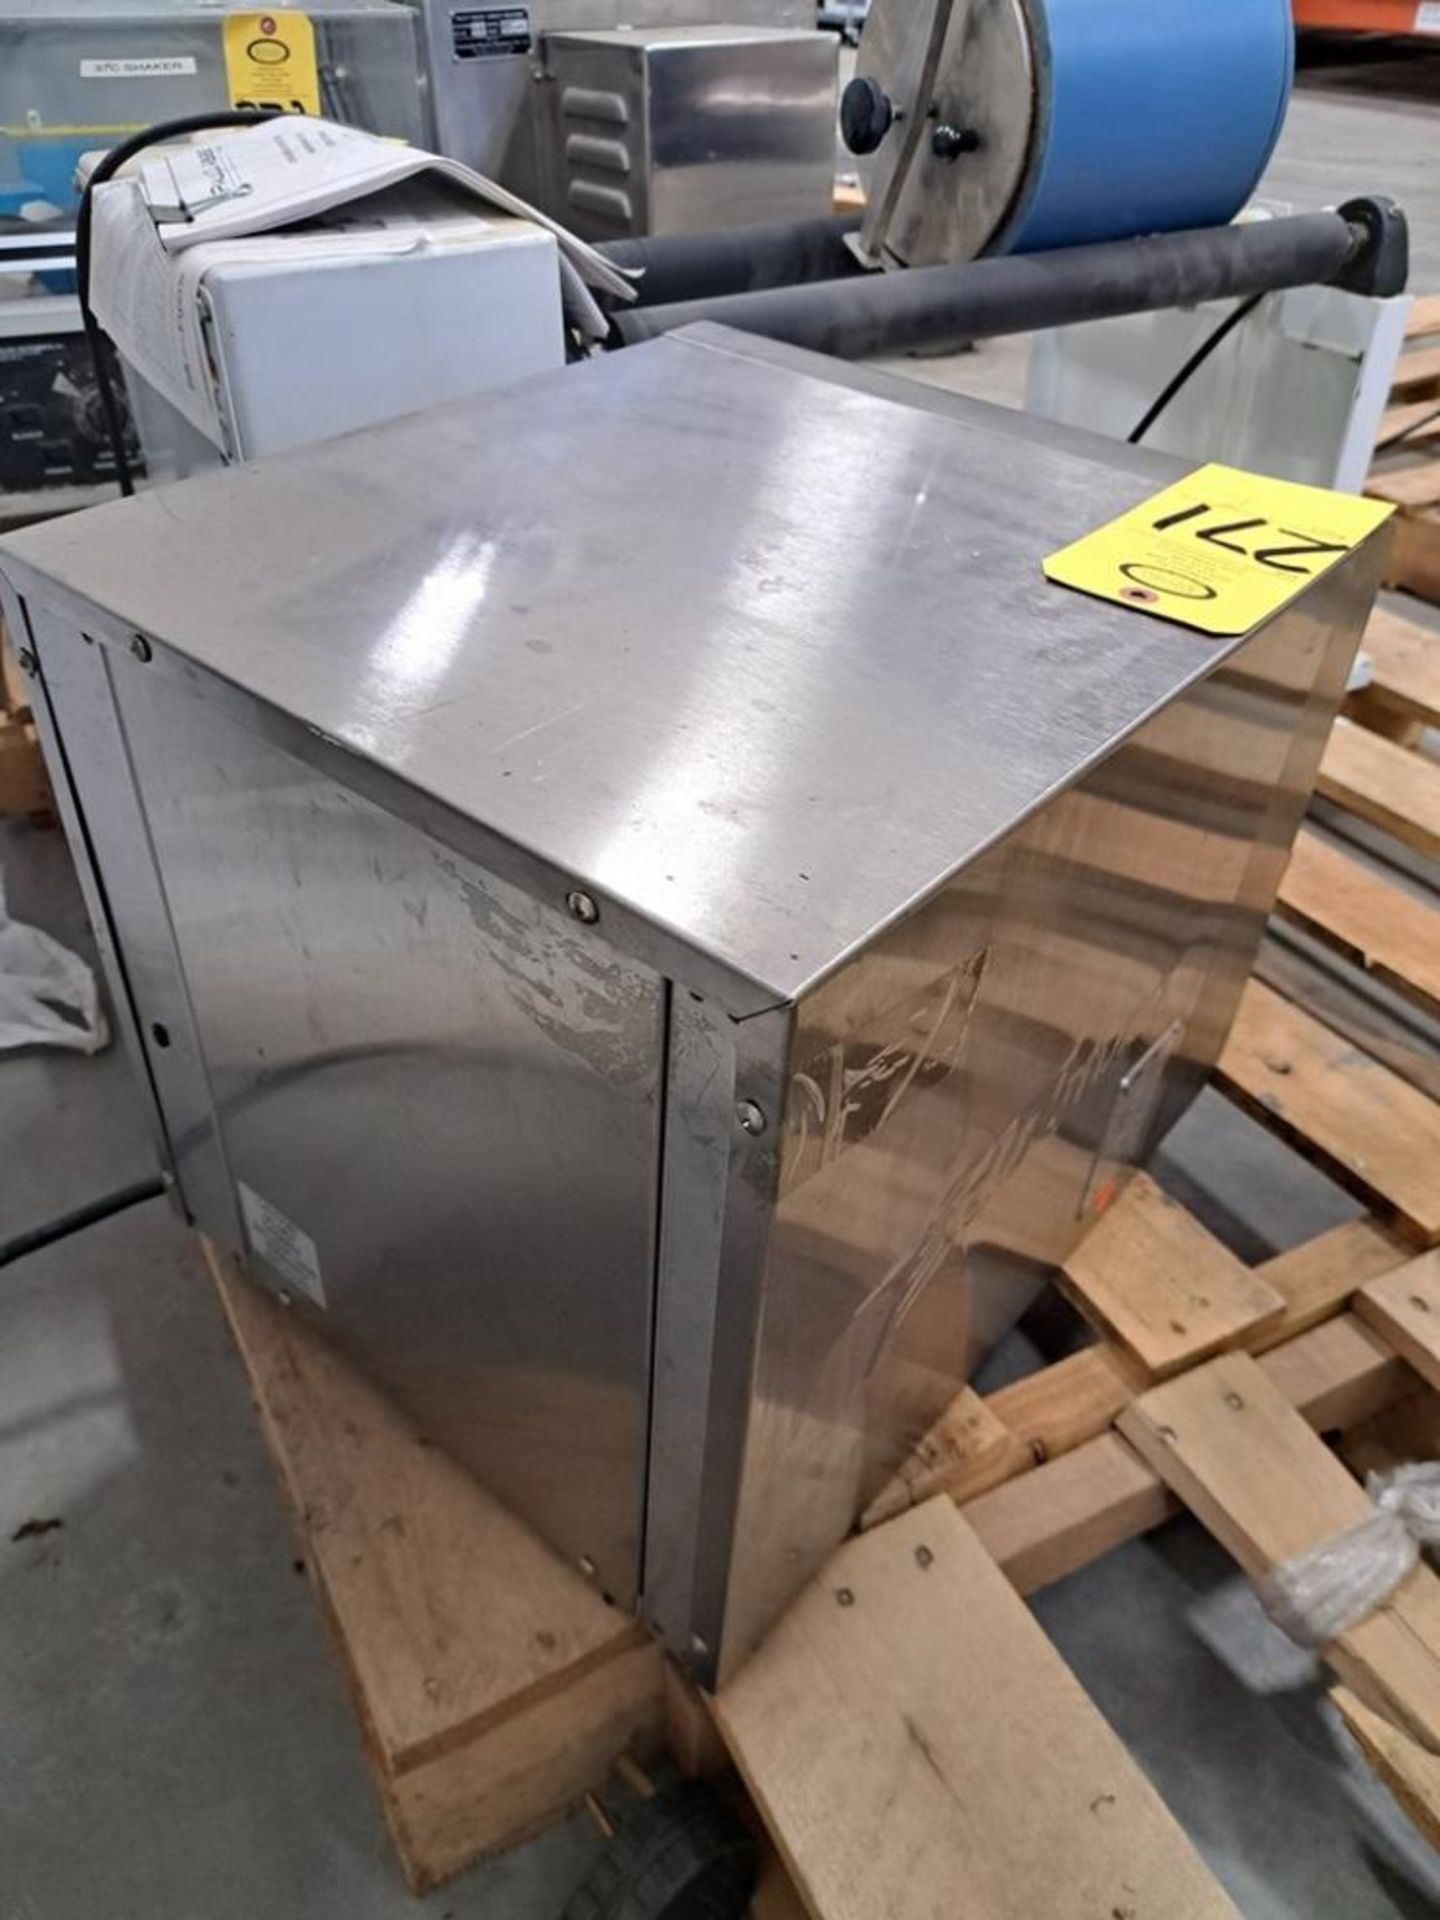 QCS/Holman Impingement Oven, 10" Wide X 16" Long conveyor (Required Loading Fee: $25.00) NO HAND - Image 2 of 2